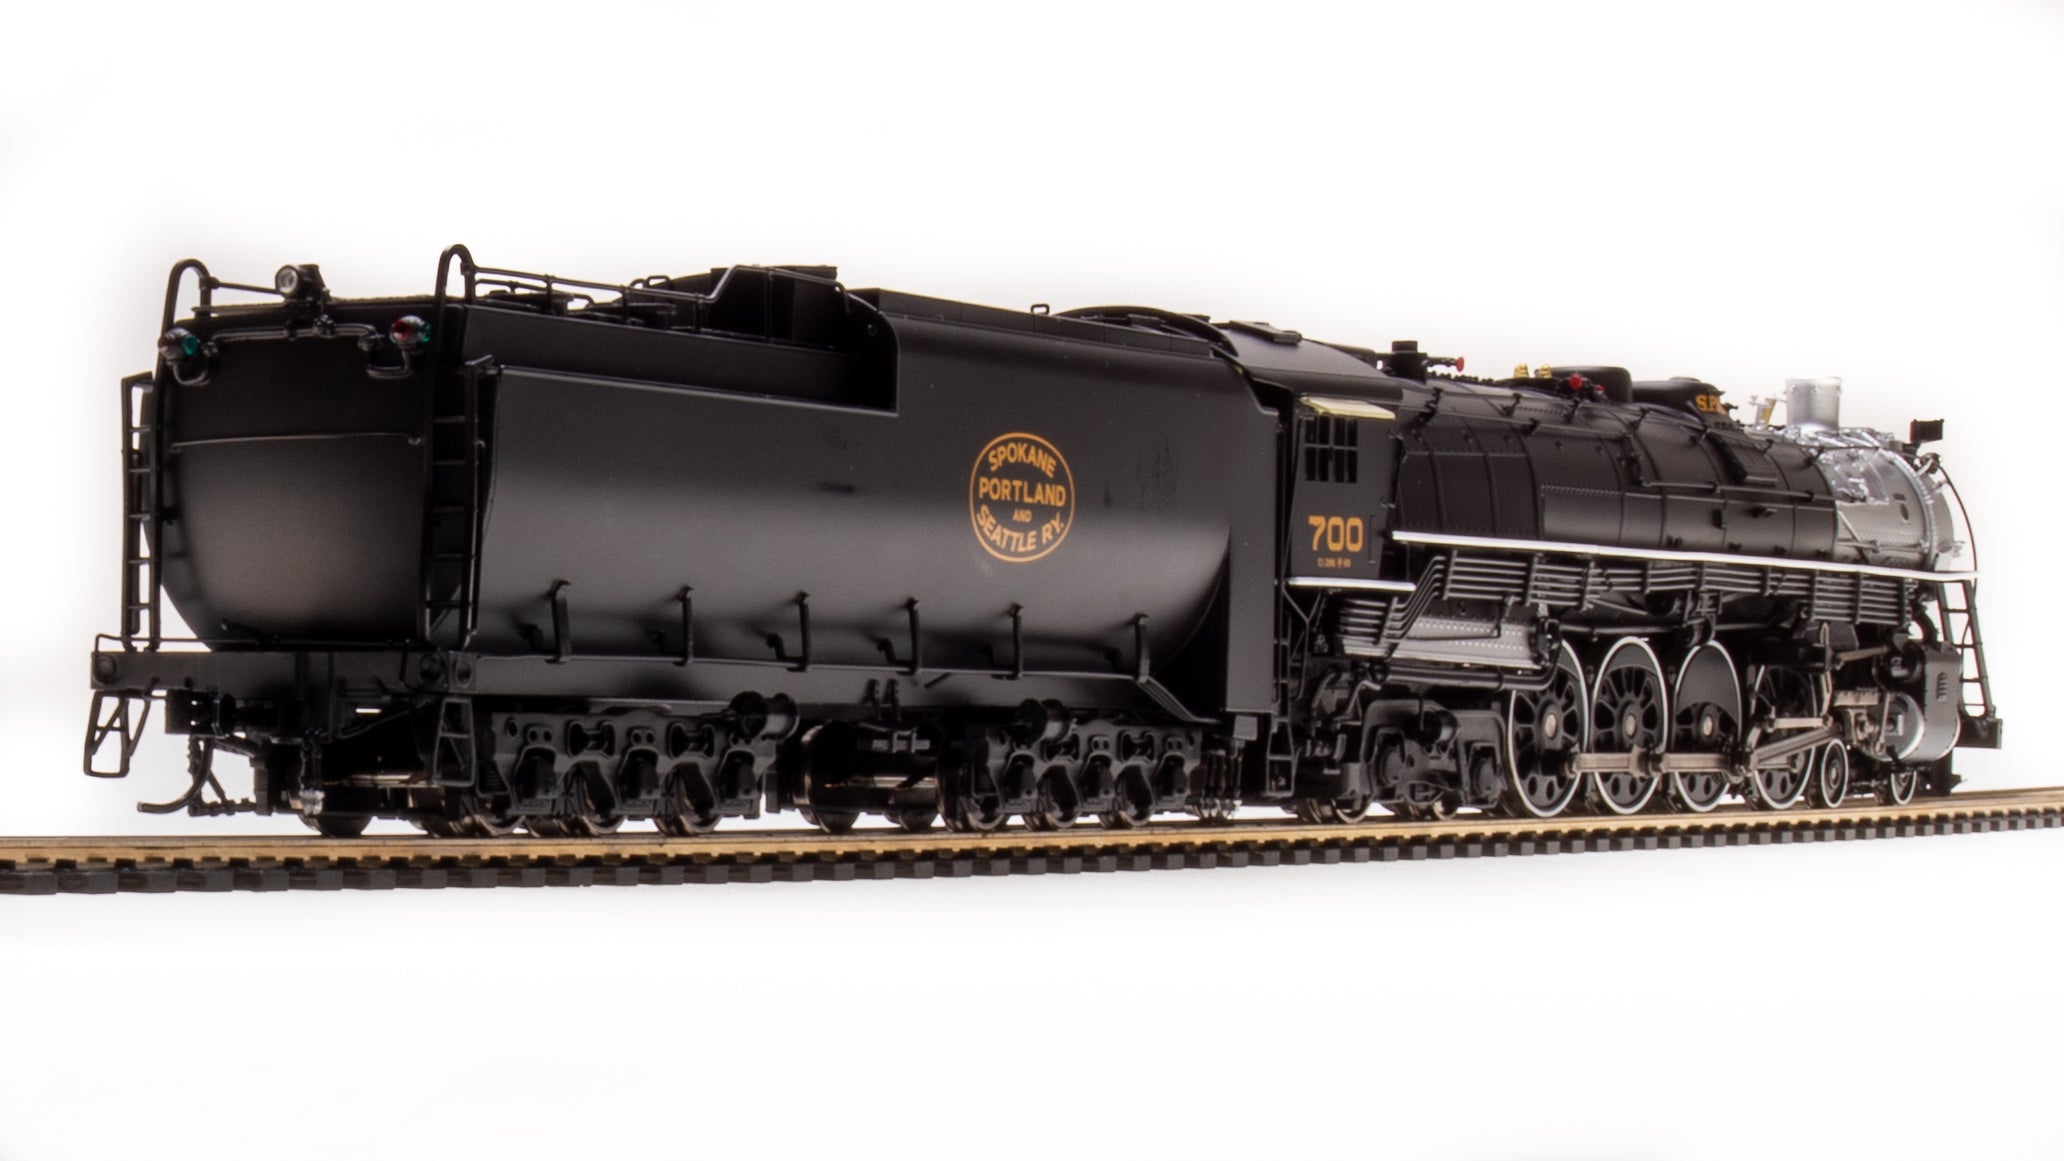 6966 SP&S E-1 4-8-4, #700, Excursion Version (1990-2004,) w/ High Numberboards, Paragon4 Sound/DC/DCC, Smoke, HO